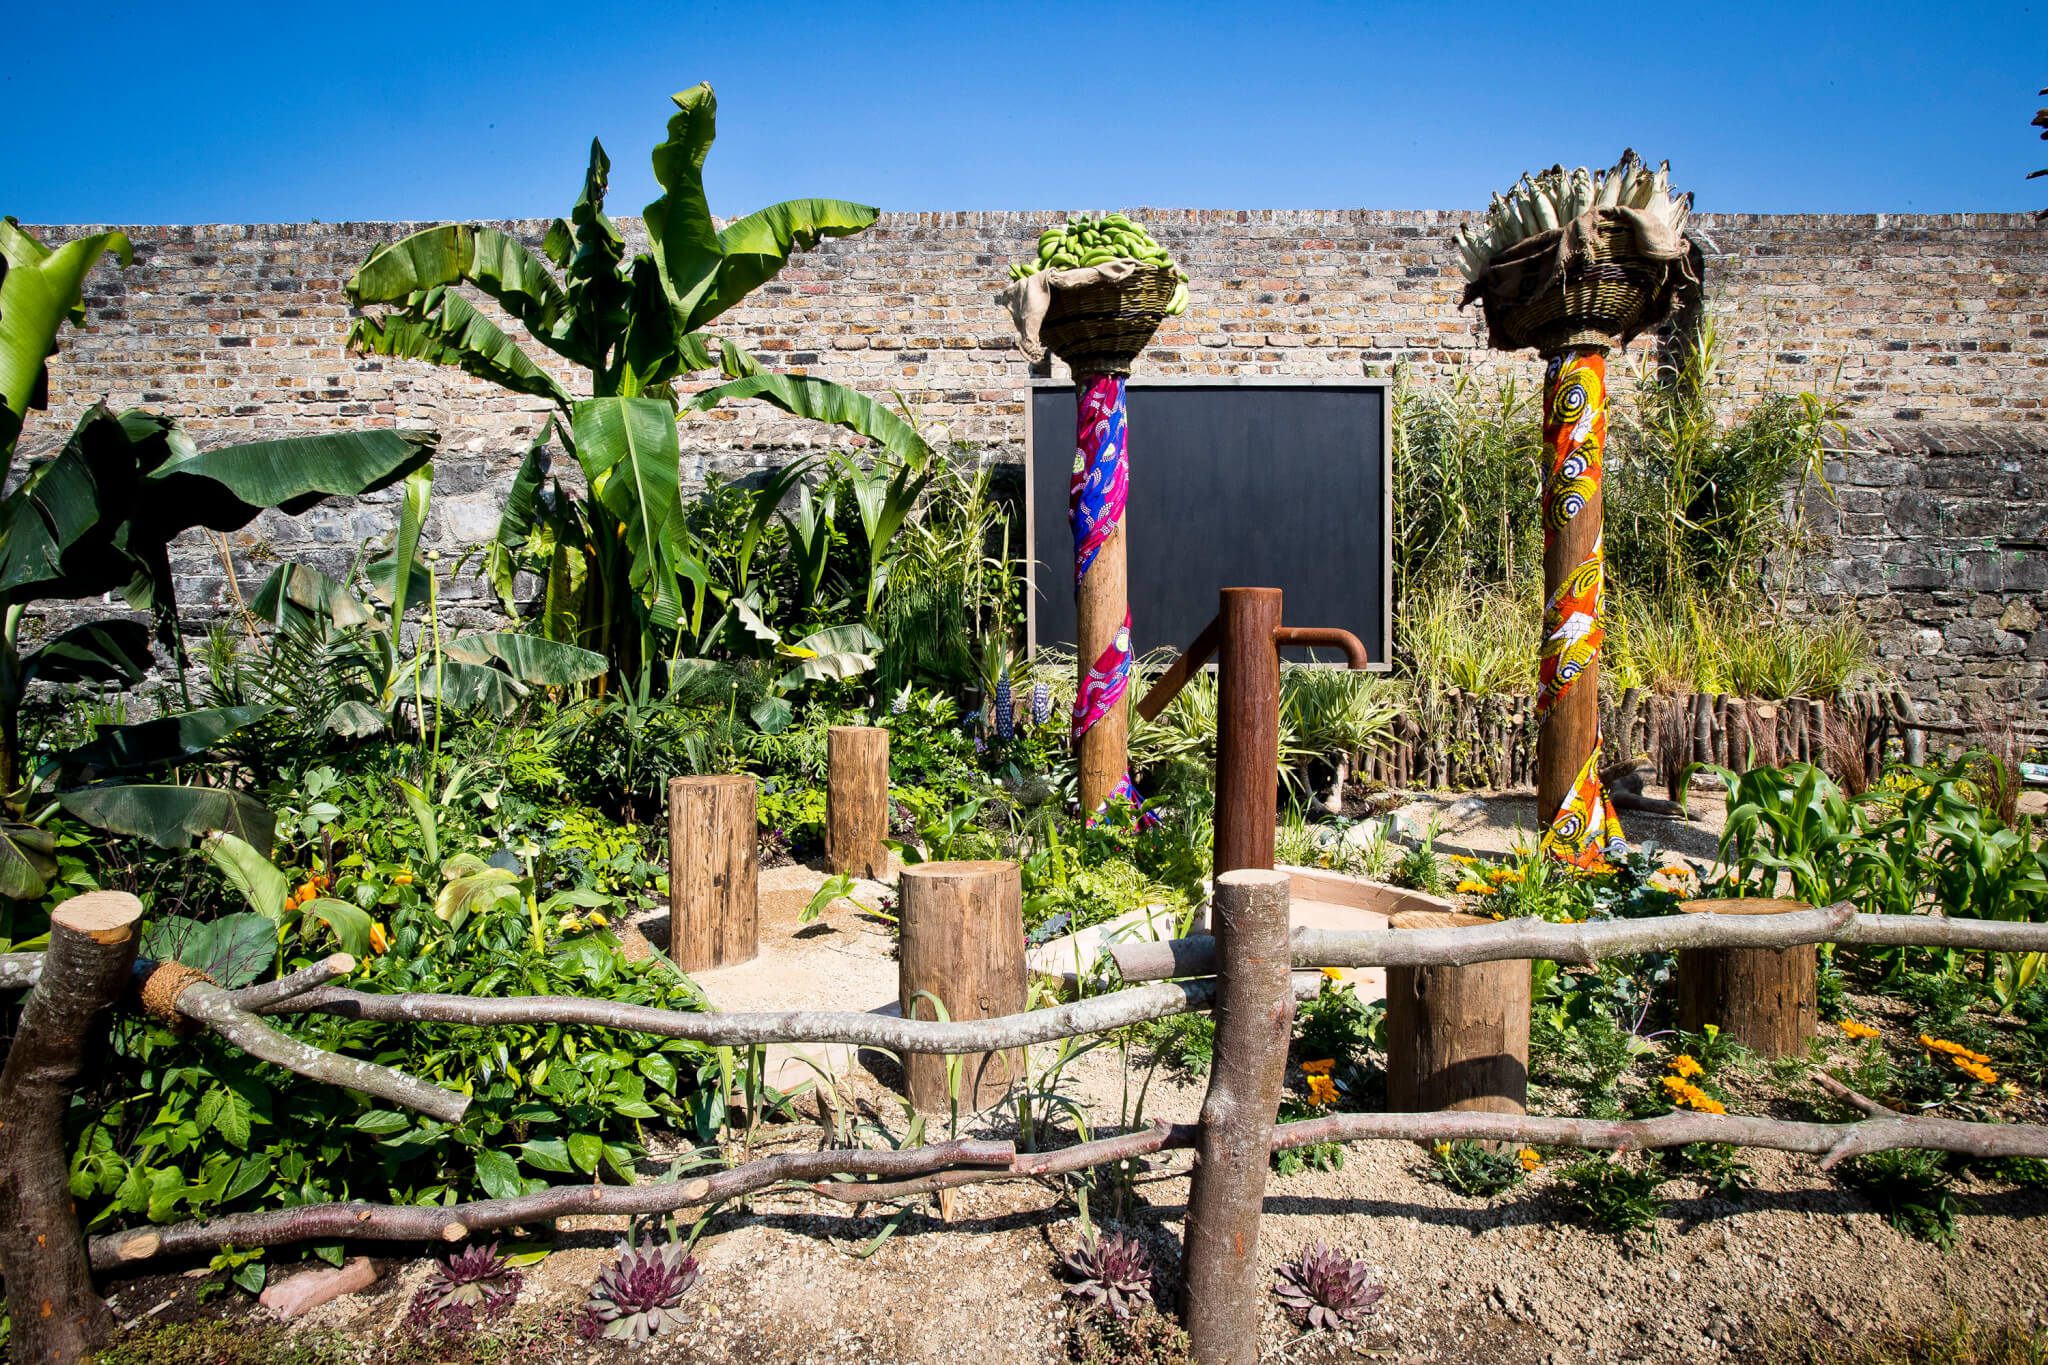 No Limits - GOAL's Garden for Women designed by Cornelia Raftery. Iain White - Fennell Photography.